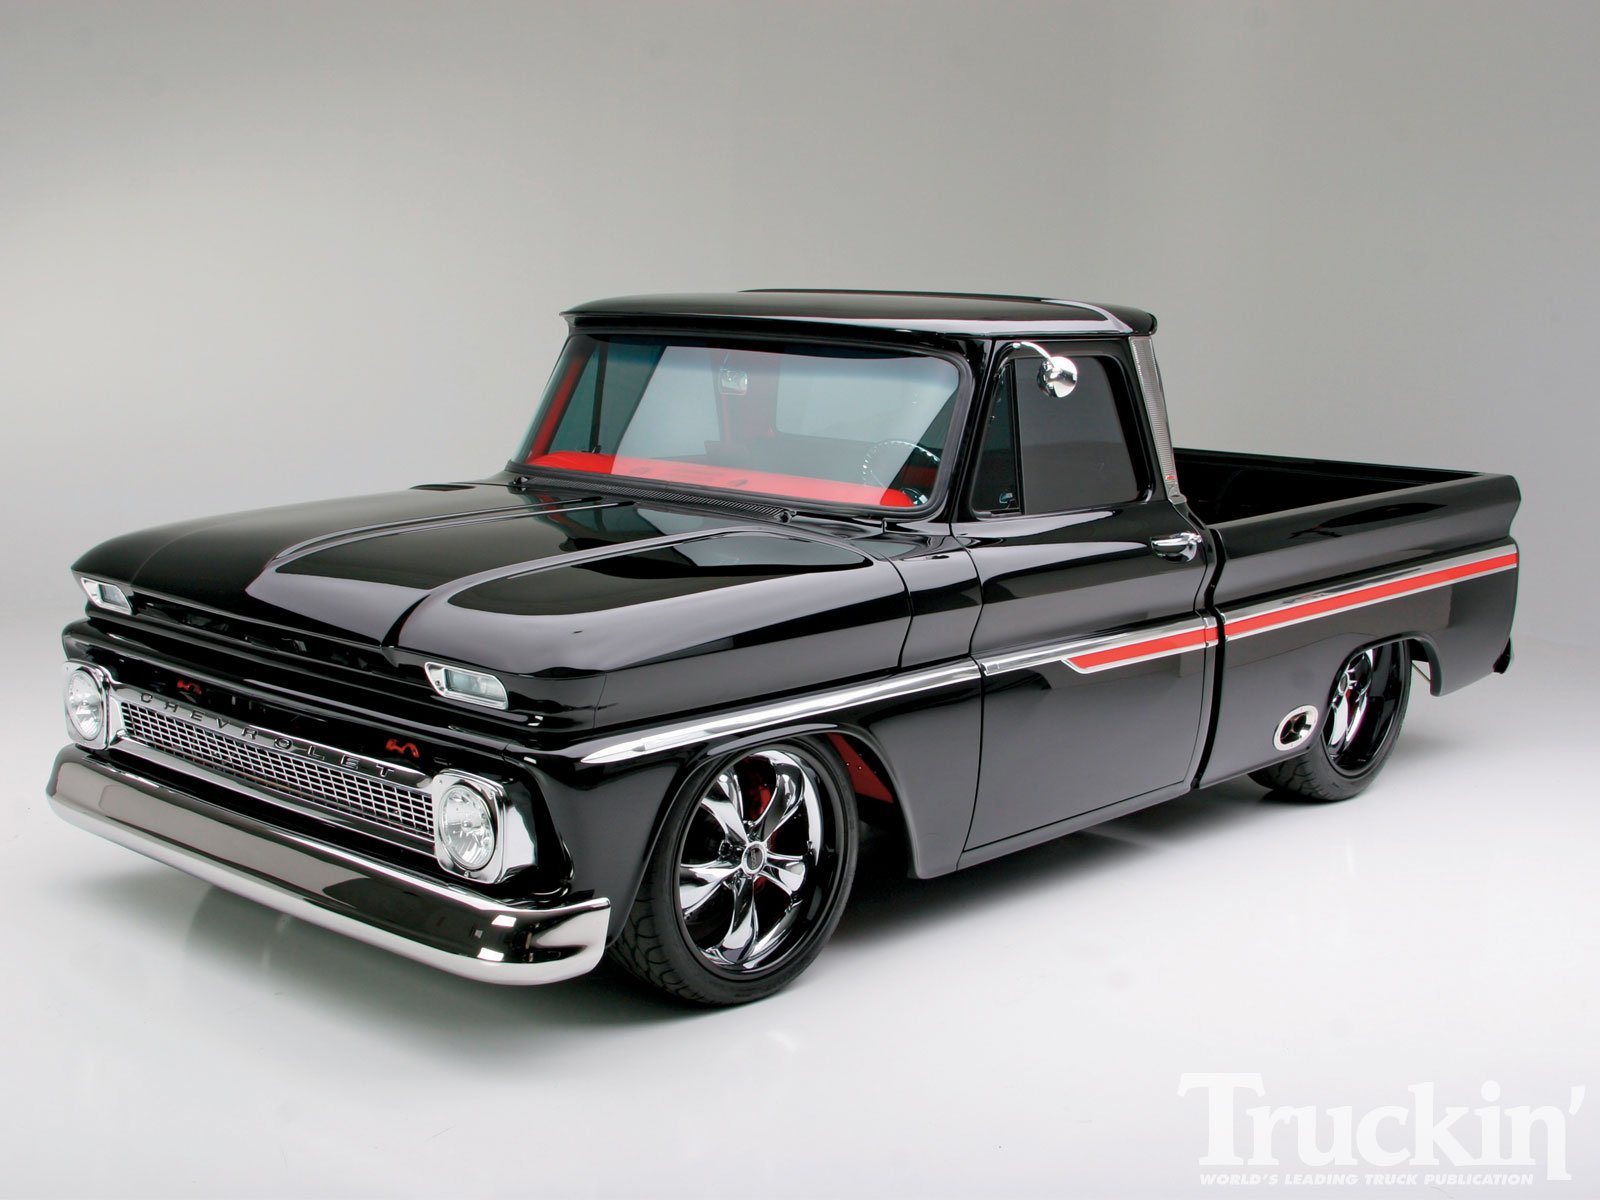 Chevy Truck Wallpapers Hd Wallpapers in Cars Imagescicom